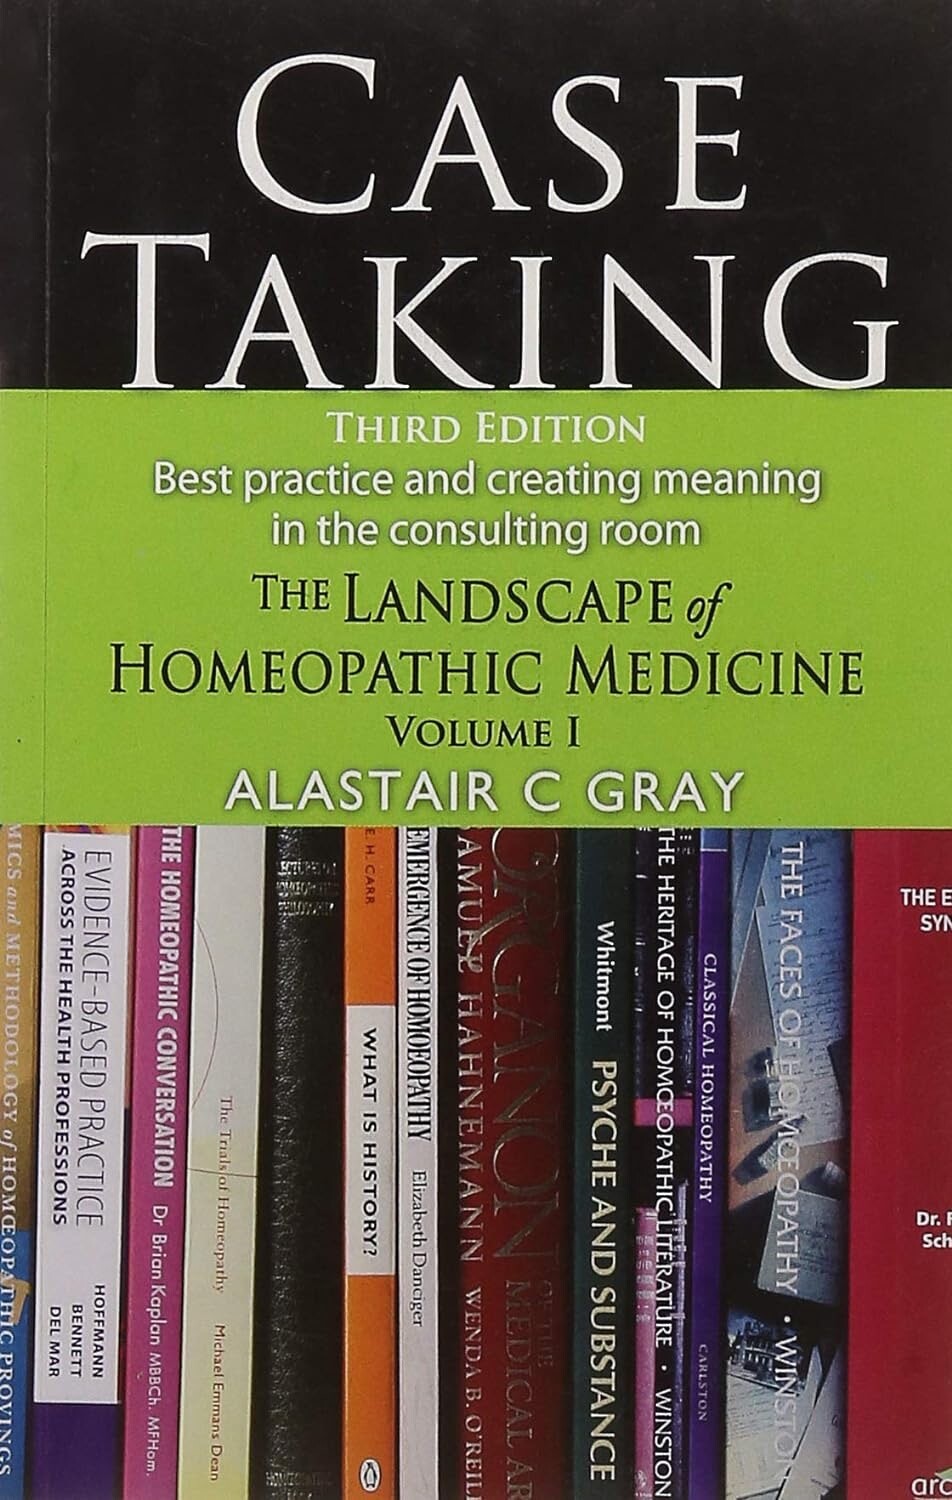 Case Taking: The Landscape of Homeopathic Medicine Volume I (Alastair Gray)